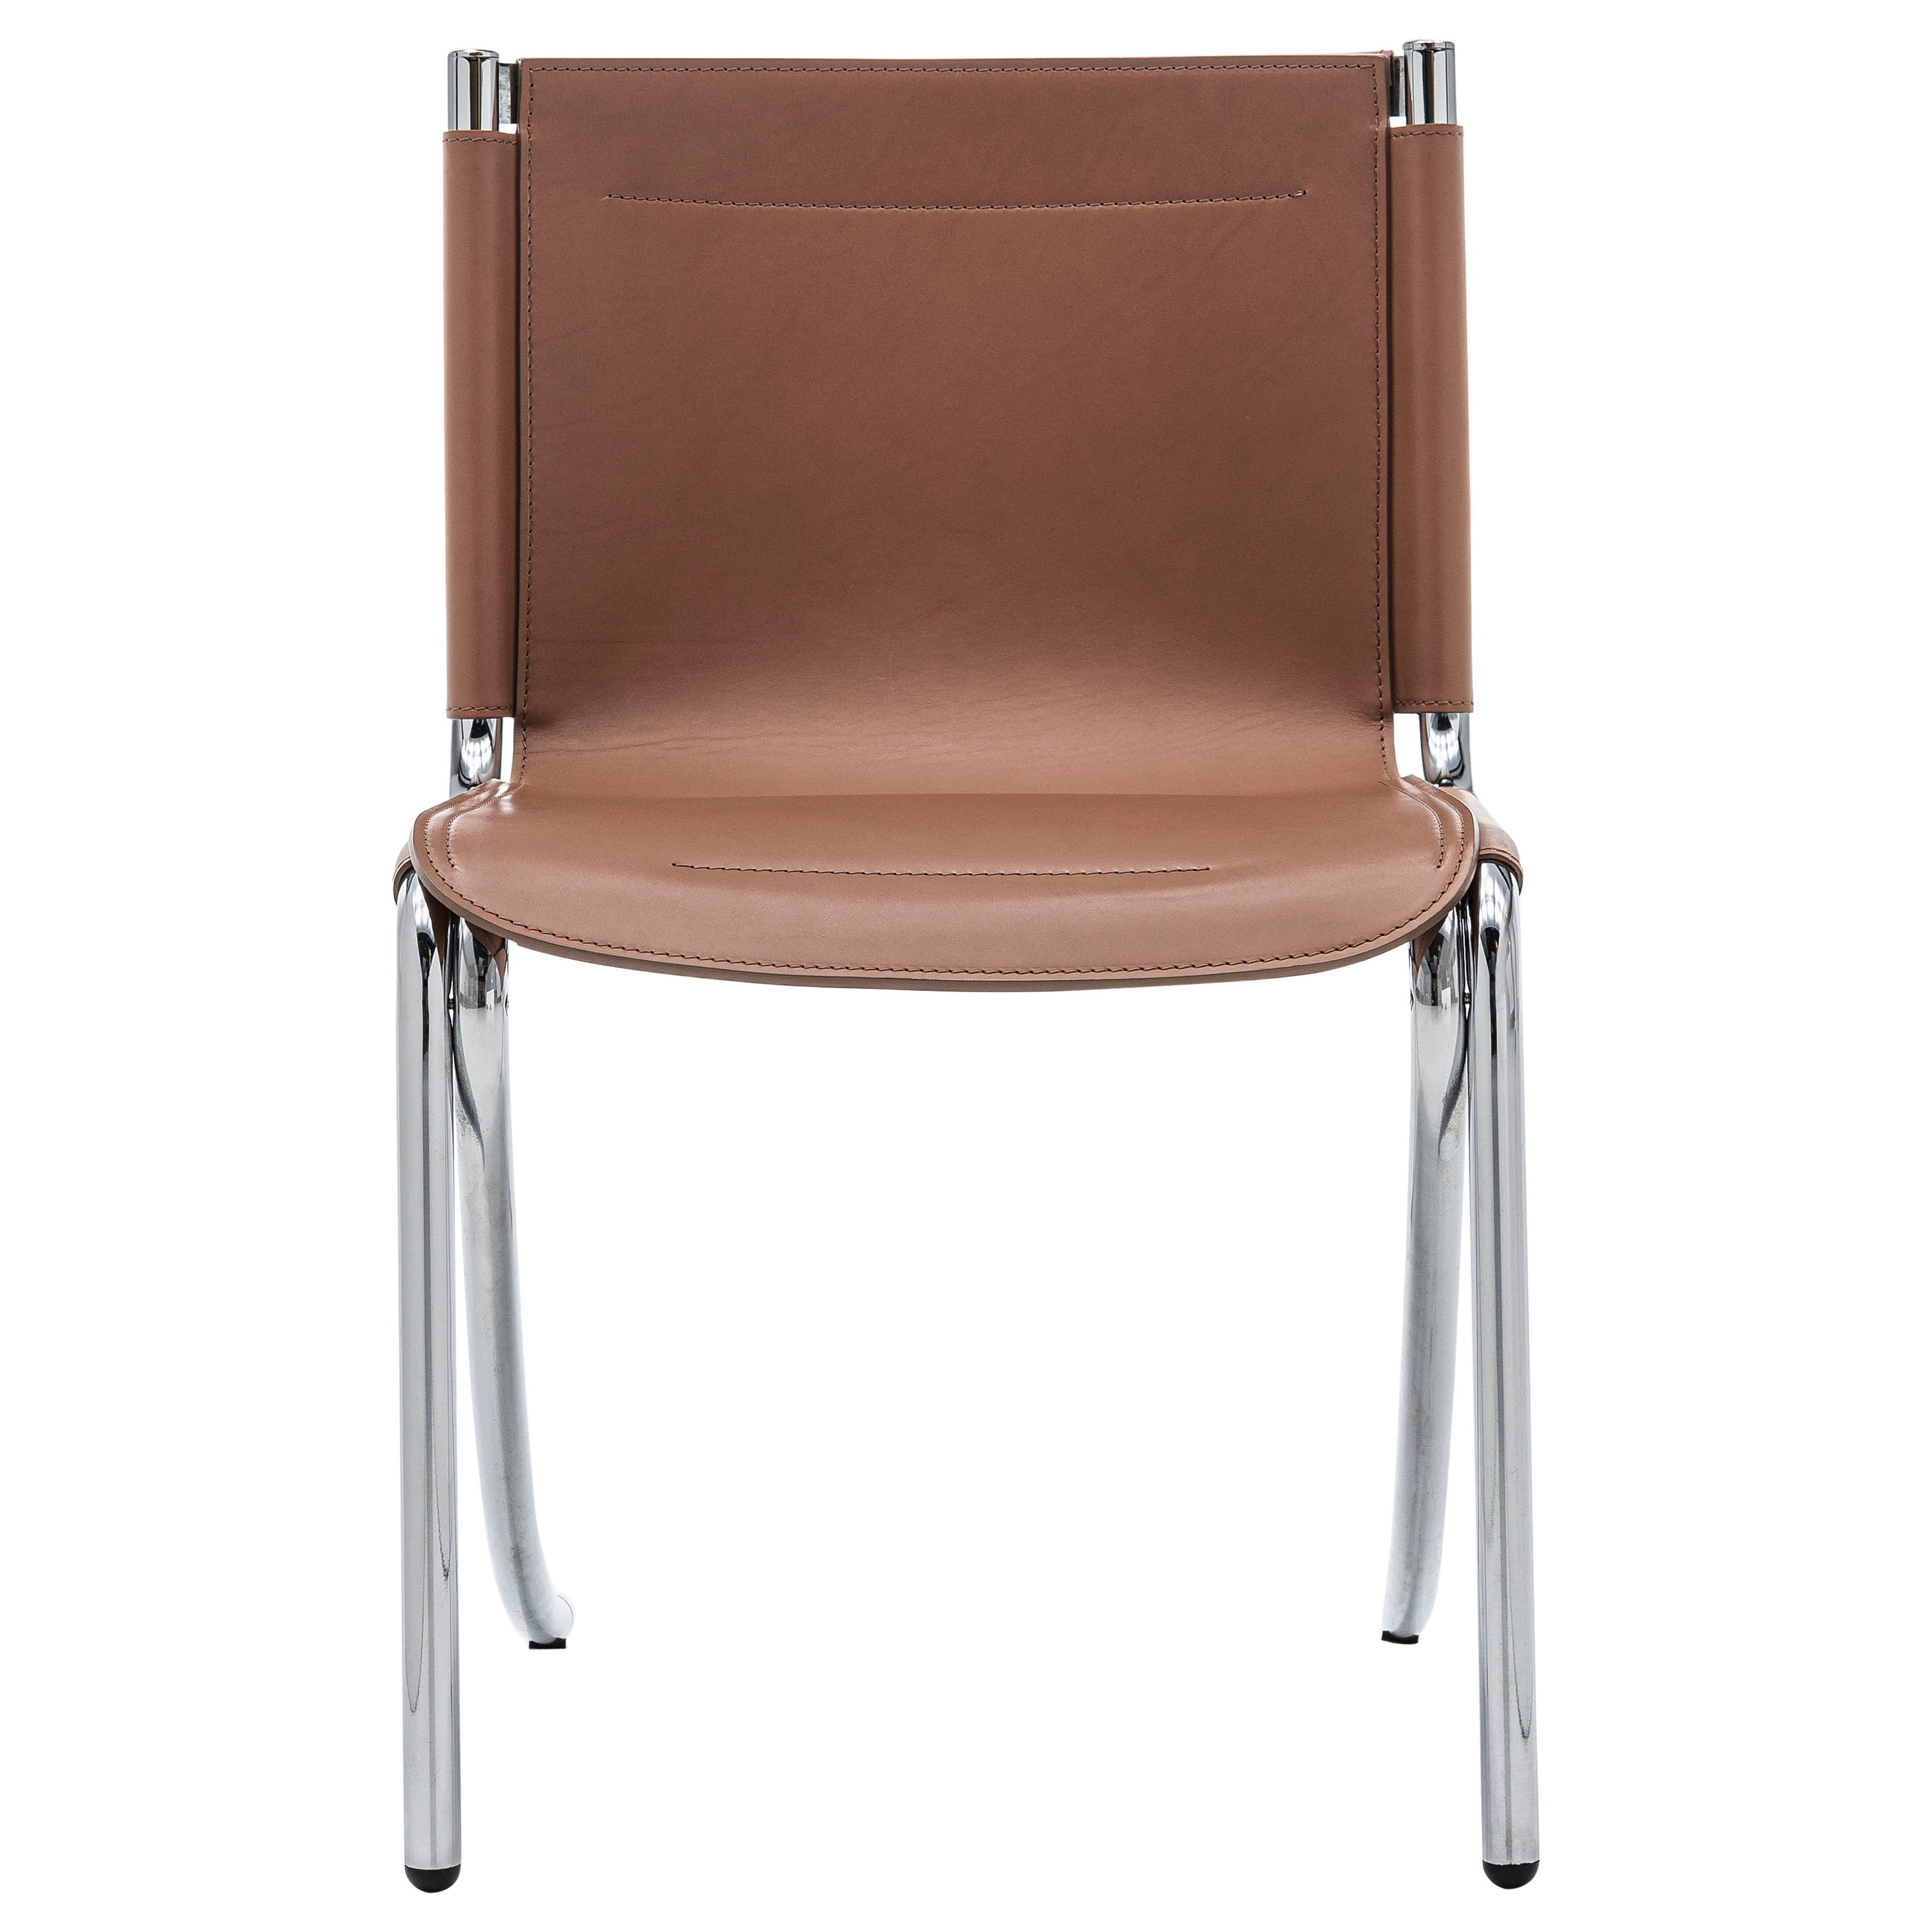 Acerbis Jot Chair in Natural Saddle Seat with Chrome Frame by Giotto Stoppino For Sale